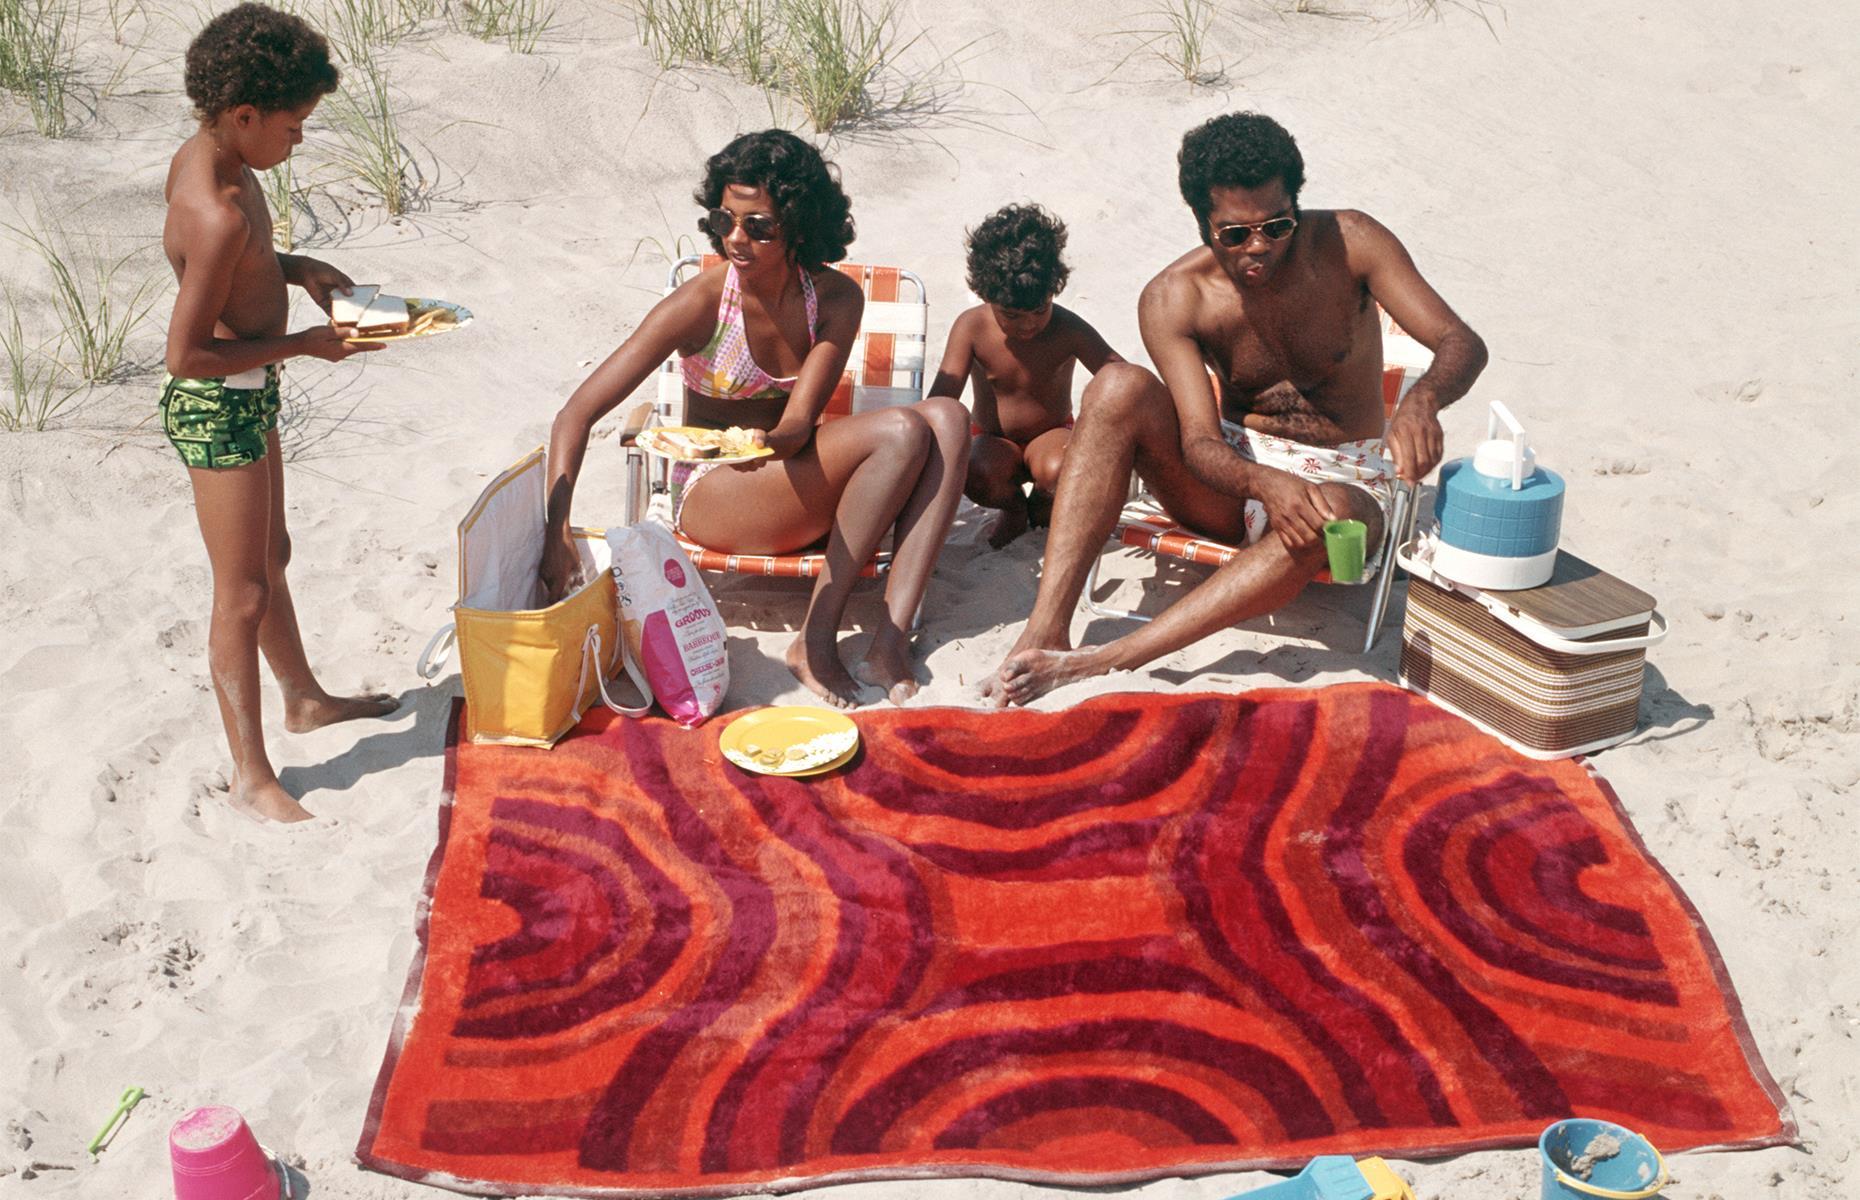 What better place for a picnic than the shortbread-colored shores of America's East Coast? Here a young family snapped in the 1970s begin to lay out a spread on a bright beach towel. Their print swimwear is unmistakably of the decade too.